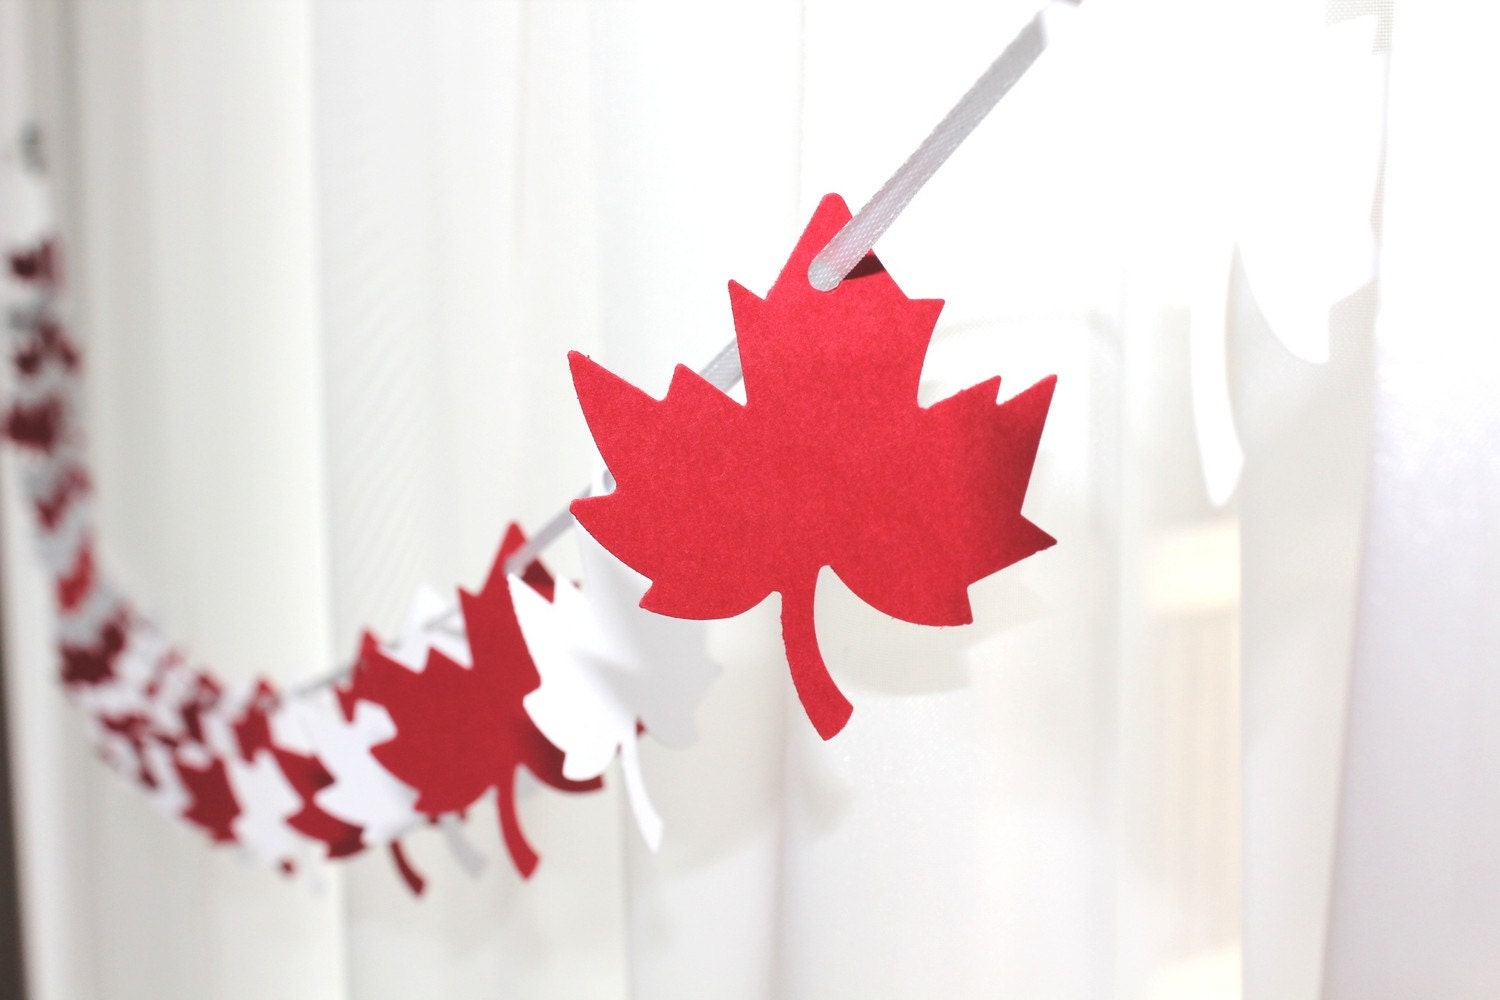 6 Foot - Maple Leaf Red and White Garland  -  Party Banner Garland perfect for Parties, Bridal or Baby Showers - GFetti